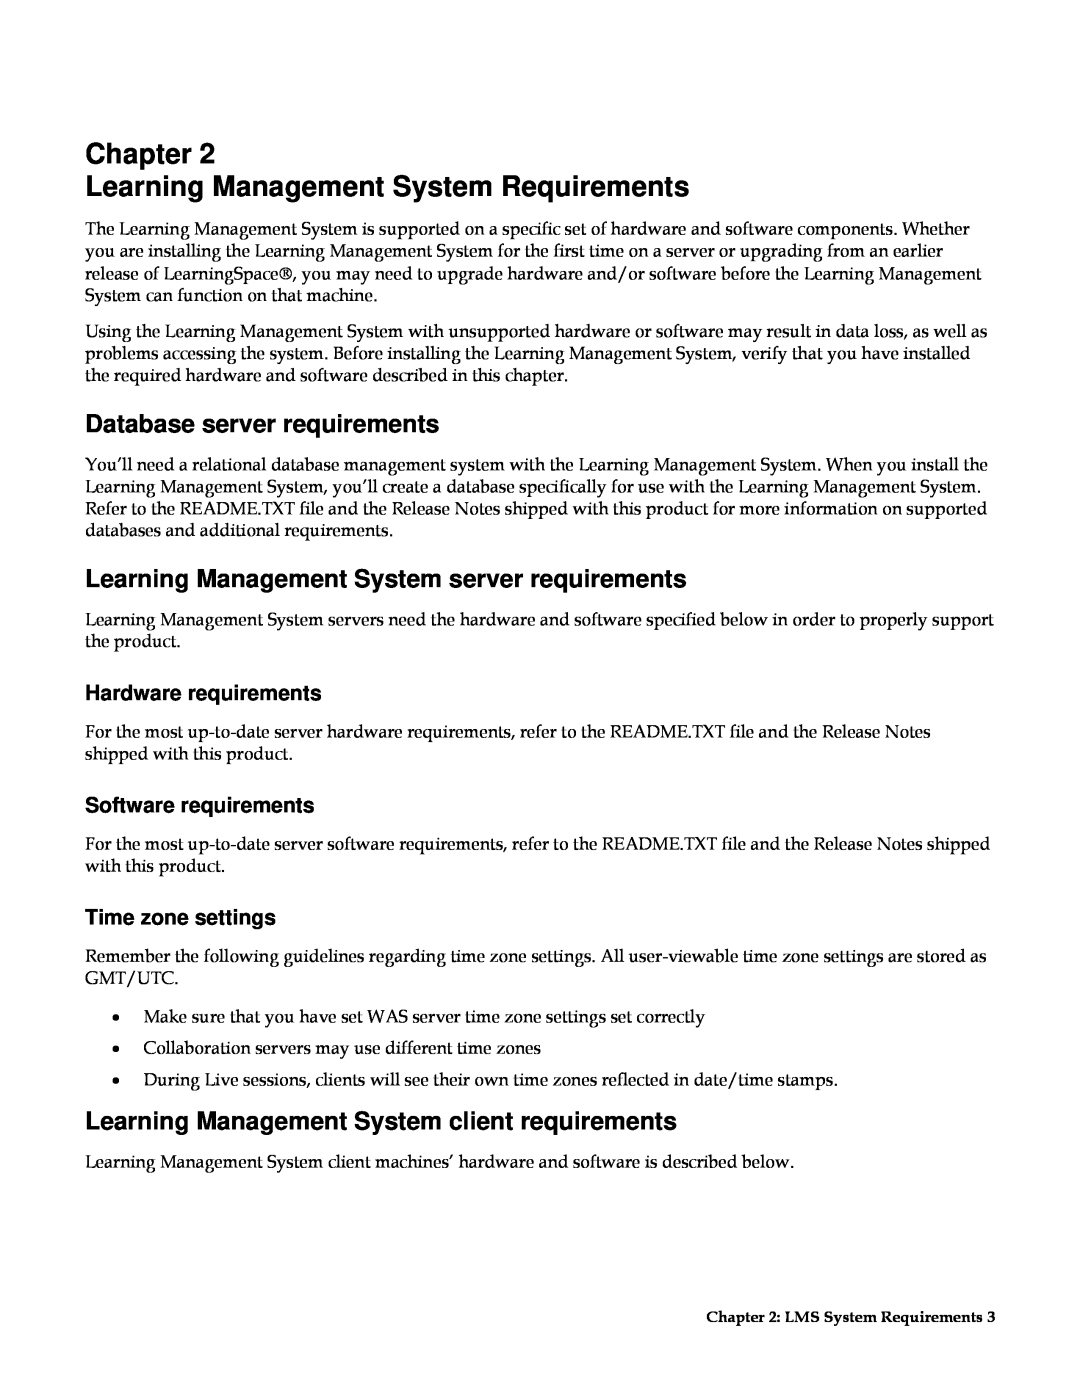 IBM G210-1784-00 Chapter Learning Management System Requirements, Database server requirements, Hardware requirements 